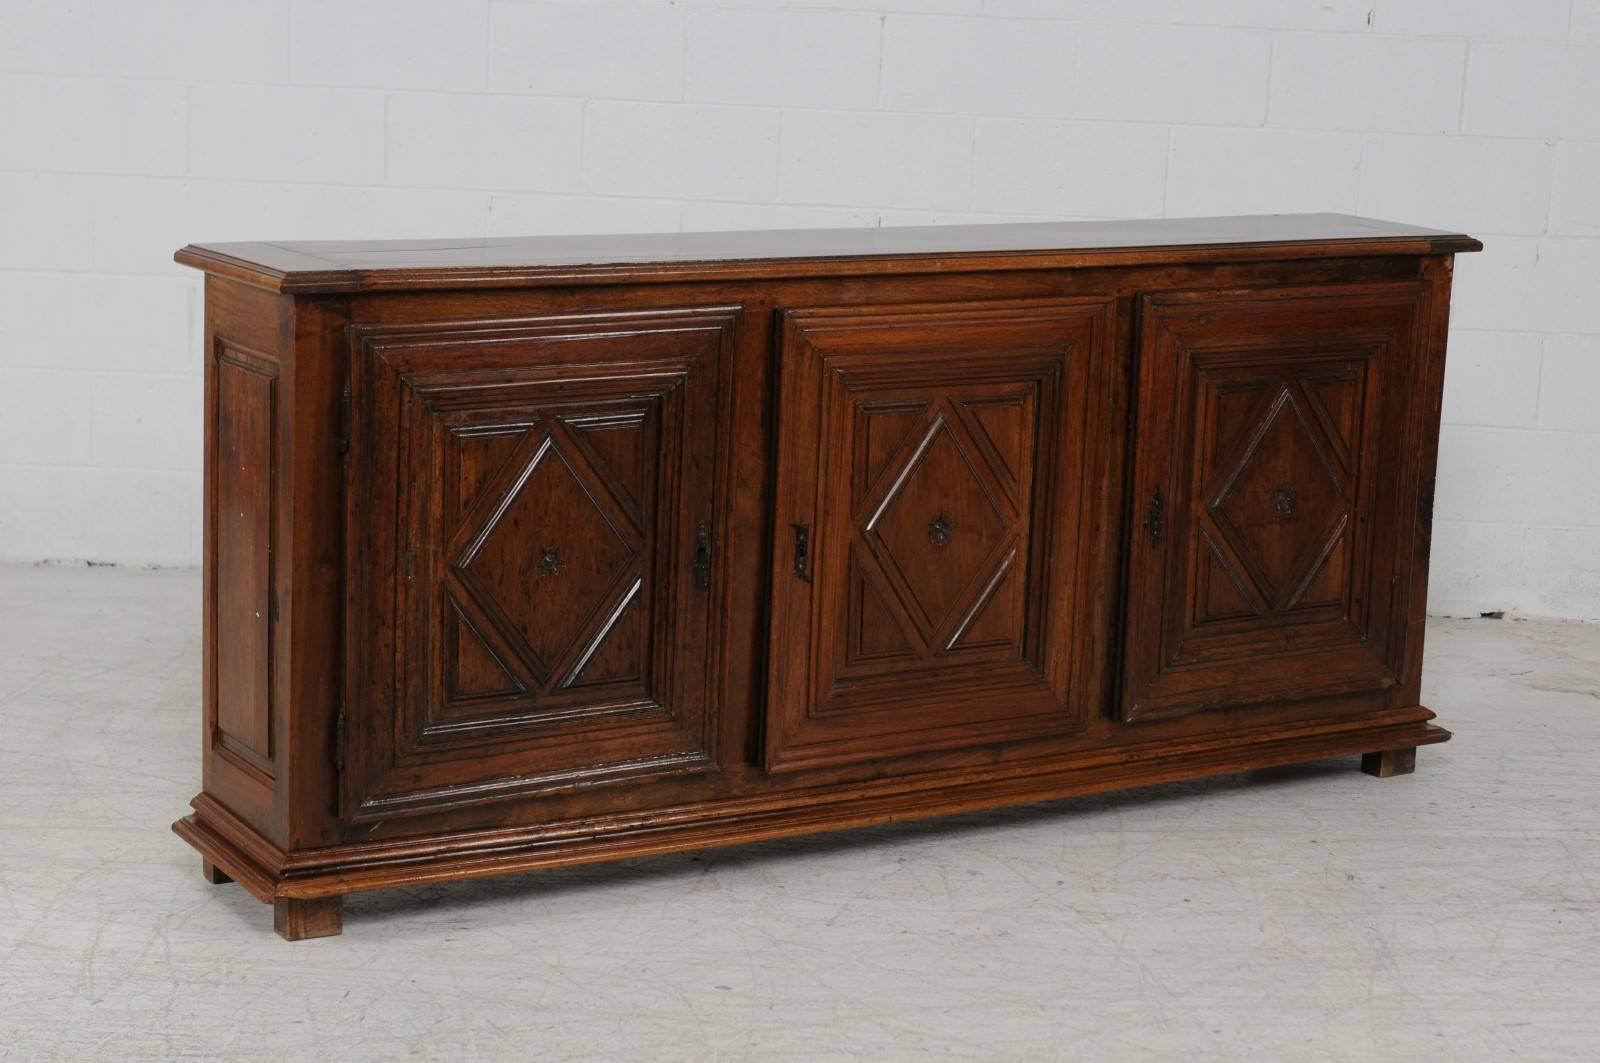 Italian Three-Door Chestnut Wood Enfilade with Diamond Motifs from the 1820s 3